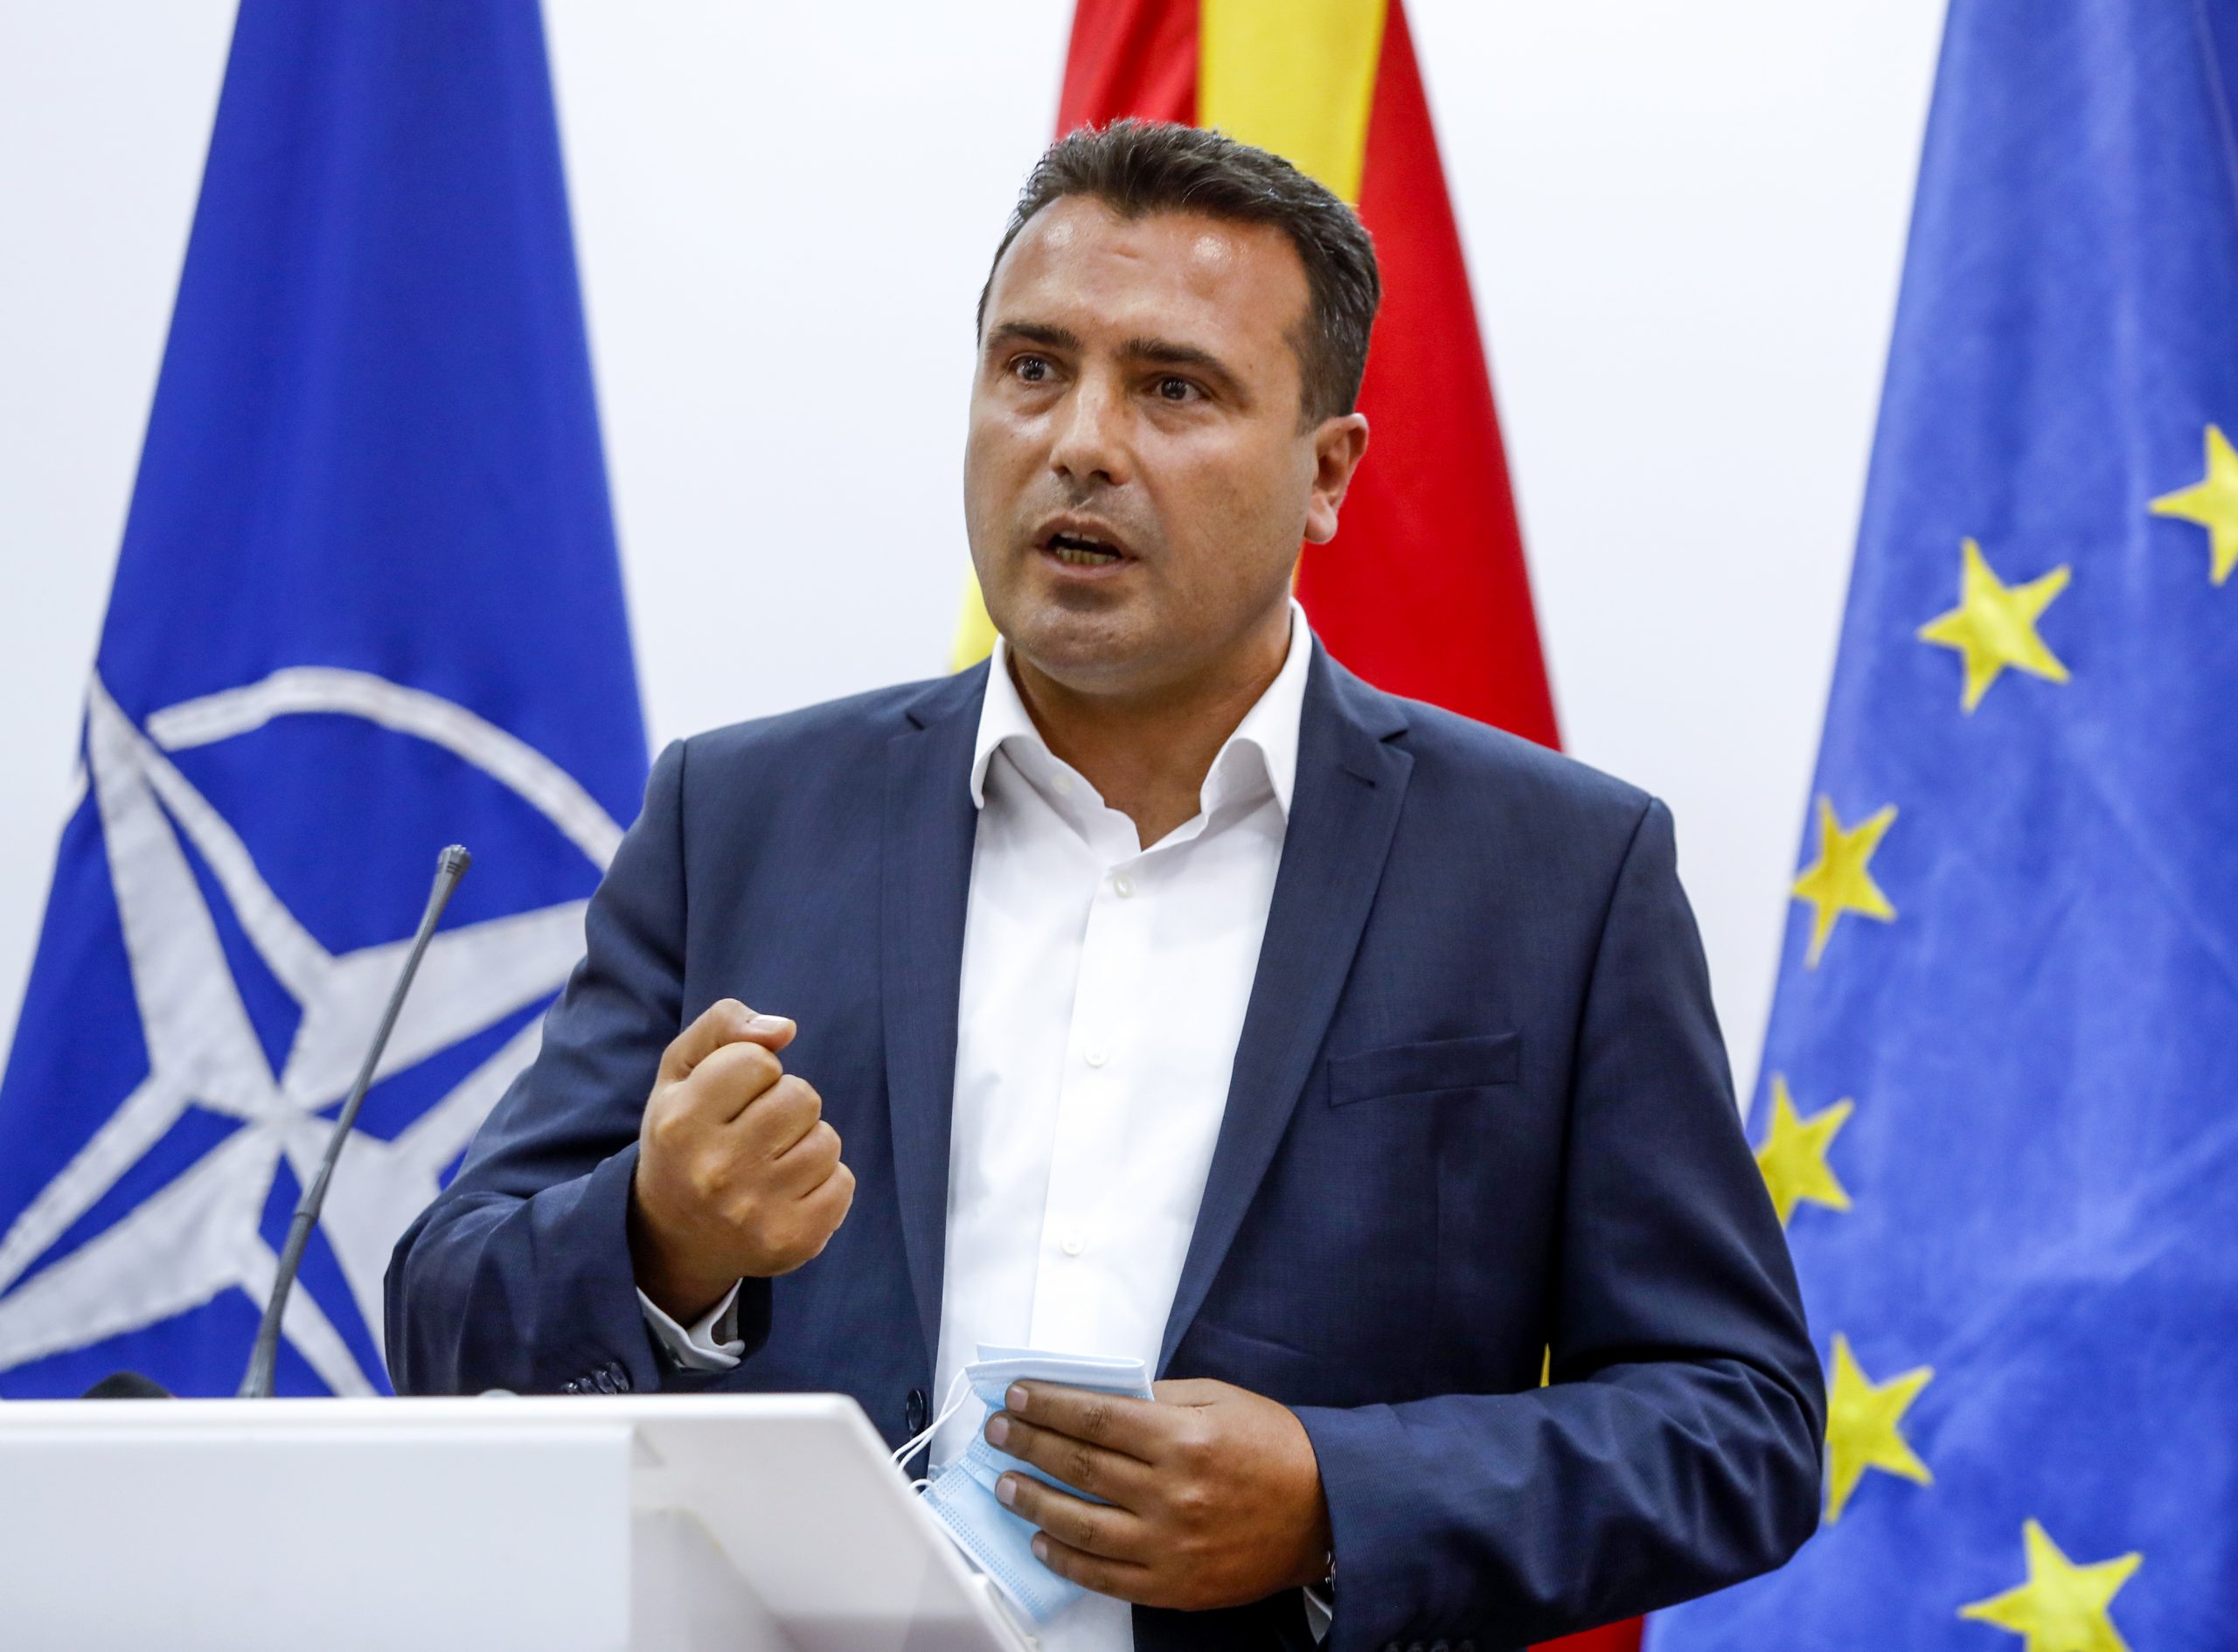 epa08610908 The leader of SDSM Zoran Zaev accompanied by the leader of DUI Ali Ahmeti (not on the picture) addressed the nation and announced that they have reached a deal for forming a new government in Skopje, North Macedonia, 18 August 2020.The Macedonian public was in suspense About who will form the new government because in the early parliamentary elections no party won a majority in the parliament. SDSM won the Macedonian block with 46 member spots in the parliament, while DUI won the Albanian block with 15 spots. The president Stevo Pendarovski gave the mandate for Prime Minister to the leader of SDSM Zoran Zaev who was successful in negotiating a deal with the leader of DUI Ali Ahmeti to form a majority in the parliament, which has 120 member spots in total. With this the two parties get to form a government which will lead the country in the next four years.  EPA/GEORGI LICOVSKI